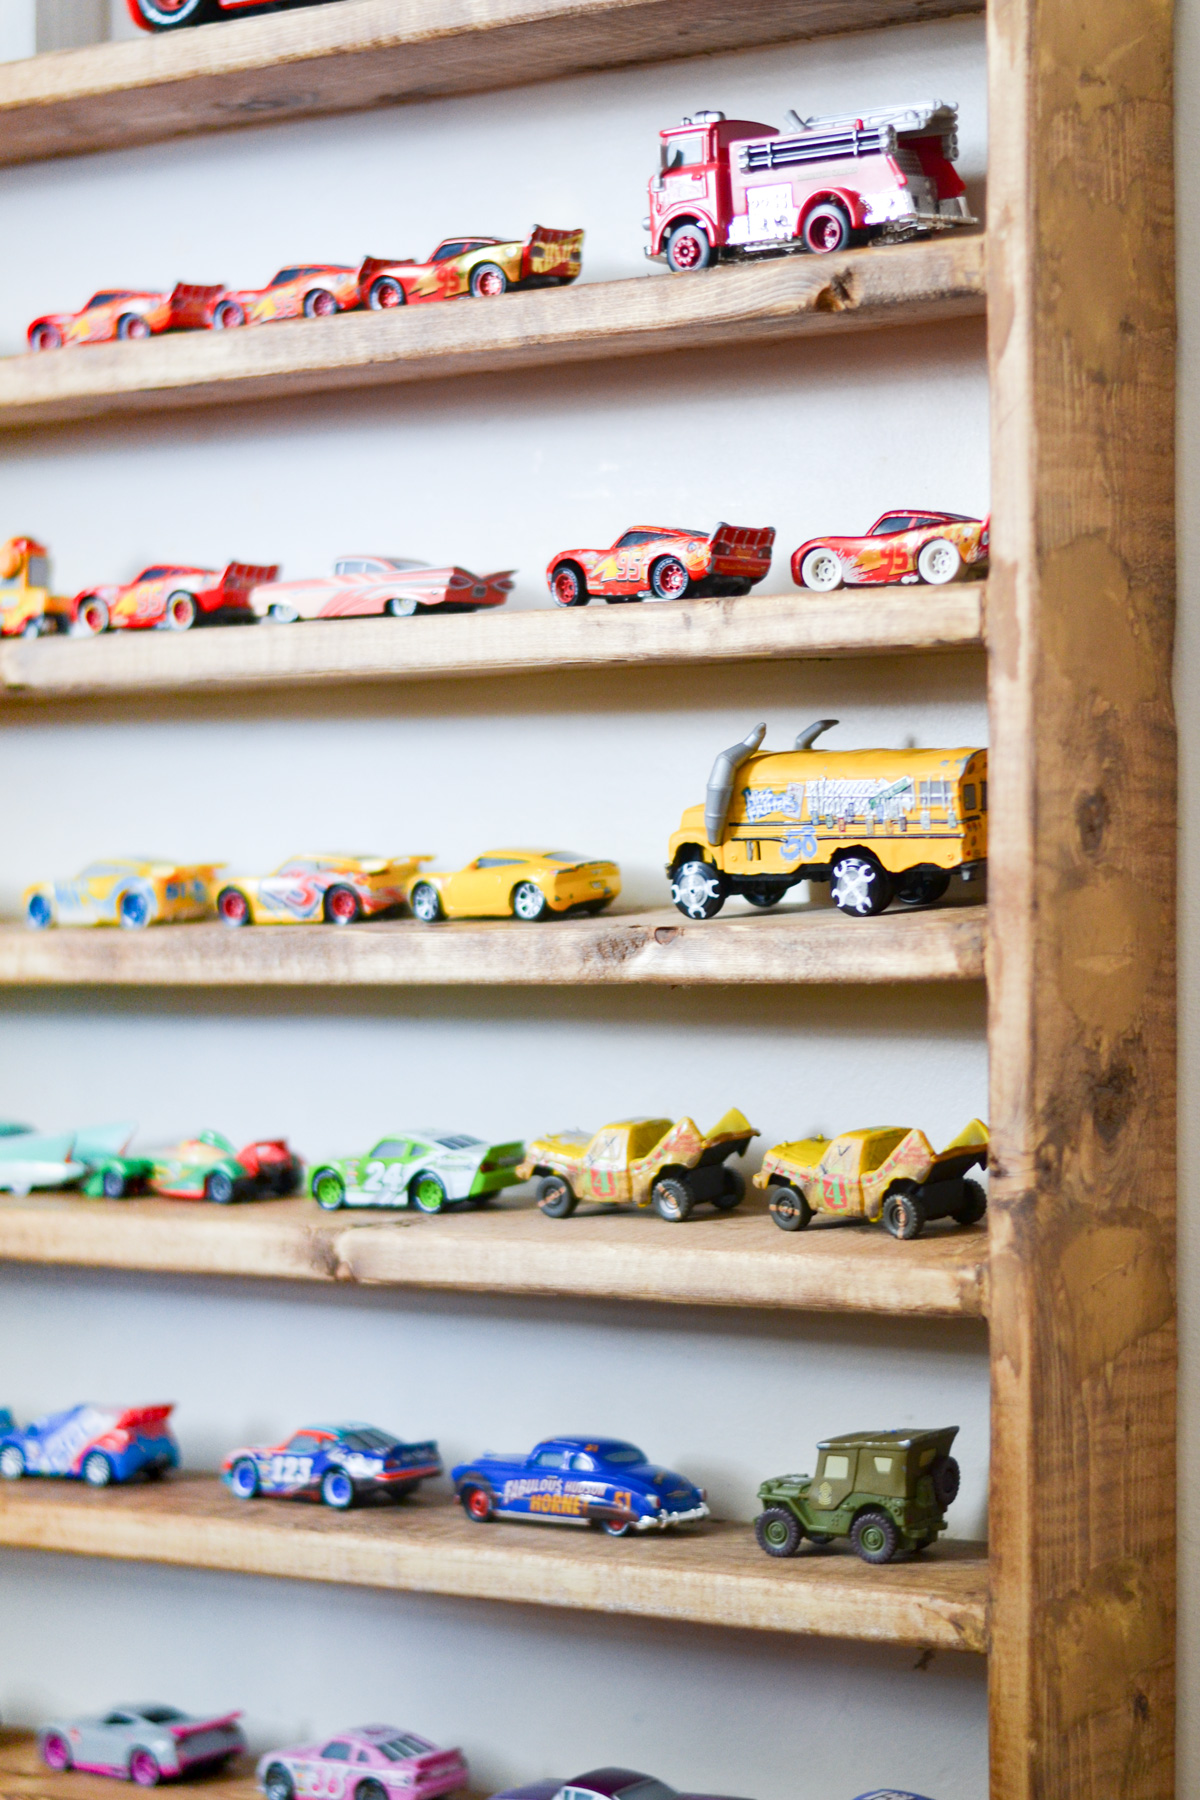 🚗 Car Organizing Tips with Kids You Need To Know